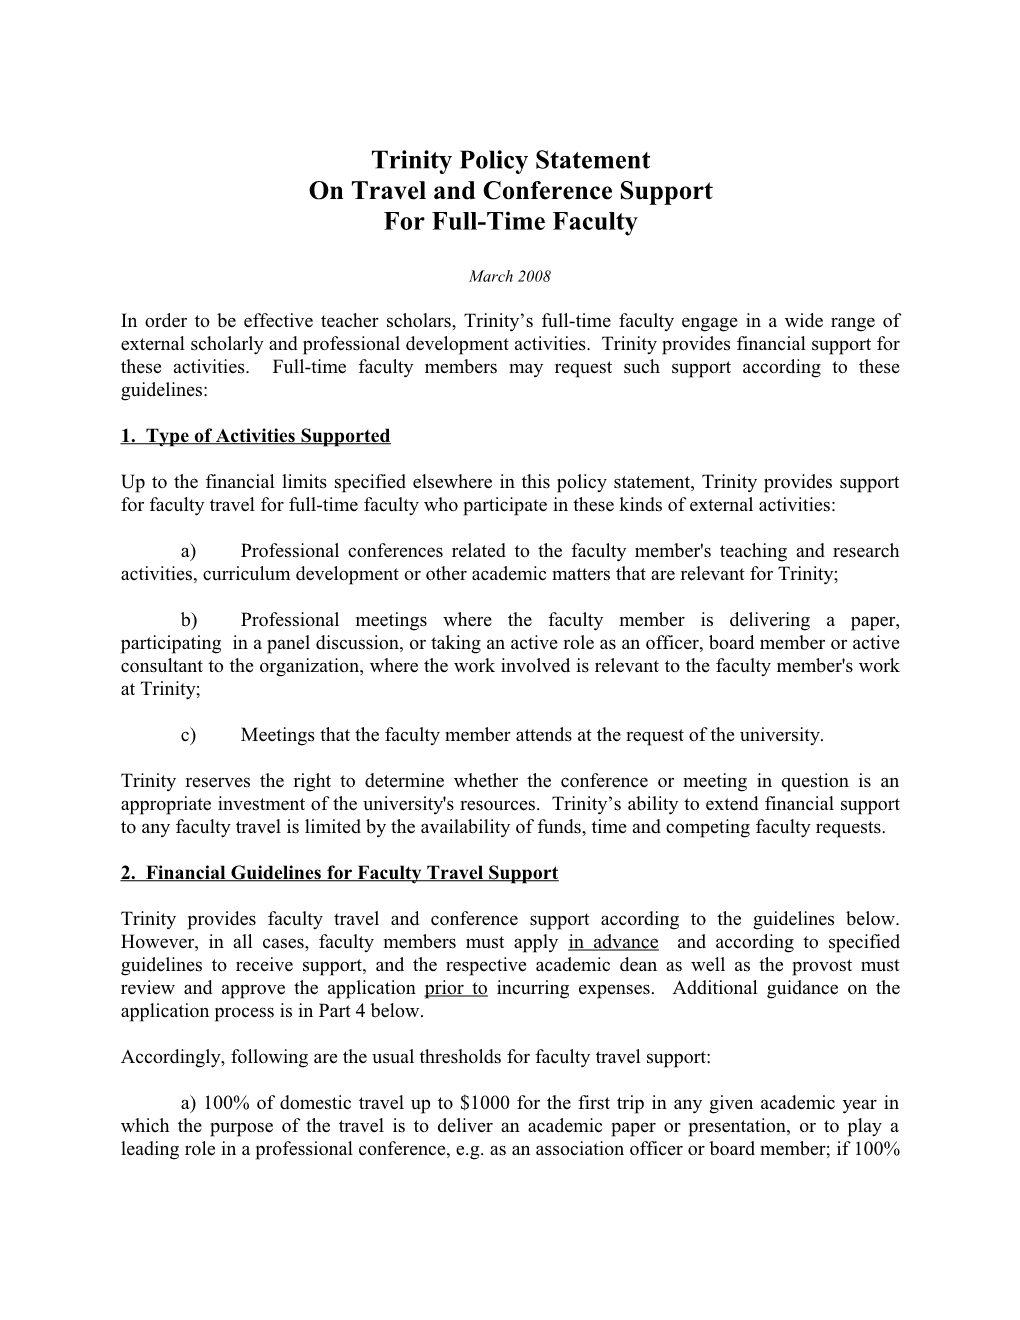 Full-Time Faculty Travel Policy